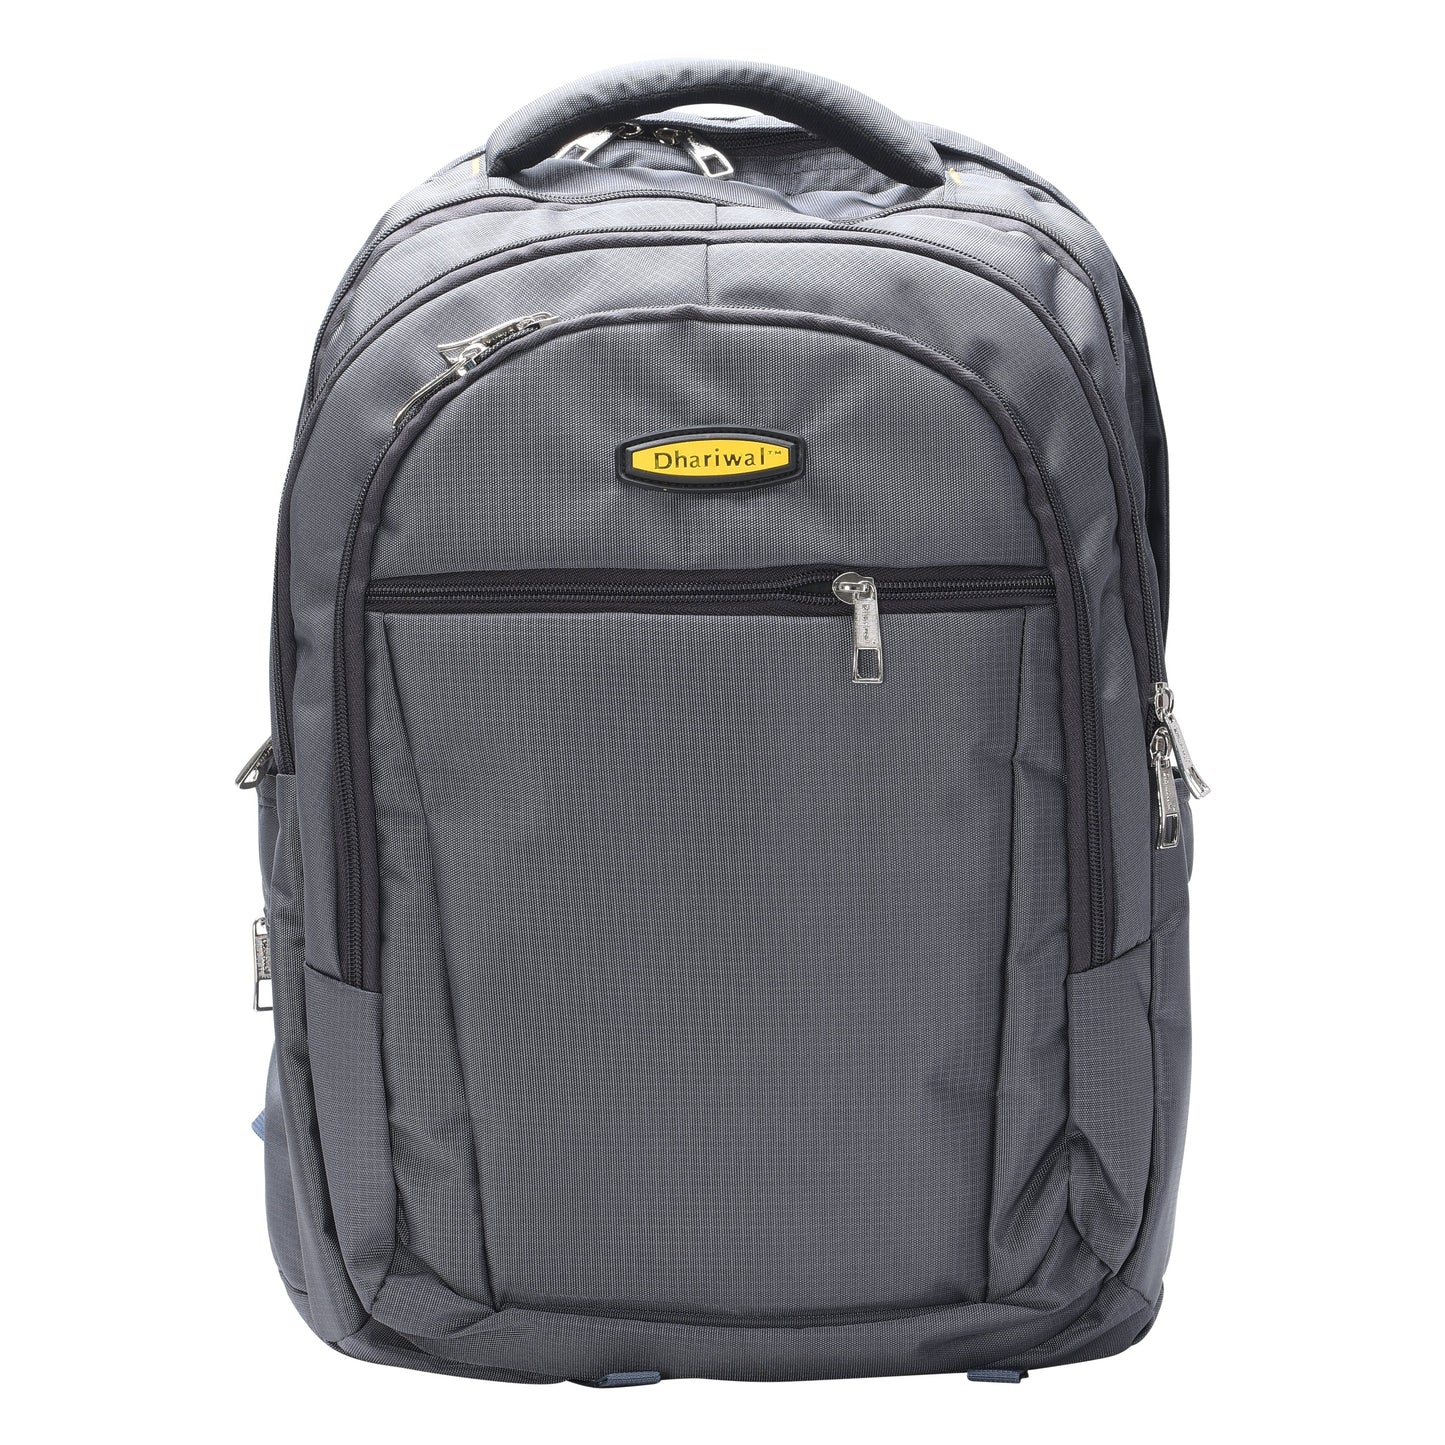 Dhariwal Unisex Dual Compartment Laptop Backpack With Rain Cover 51L LB-106 Laptop Bags Mohanlal Jain (Dhariwal Bags) Grey 